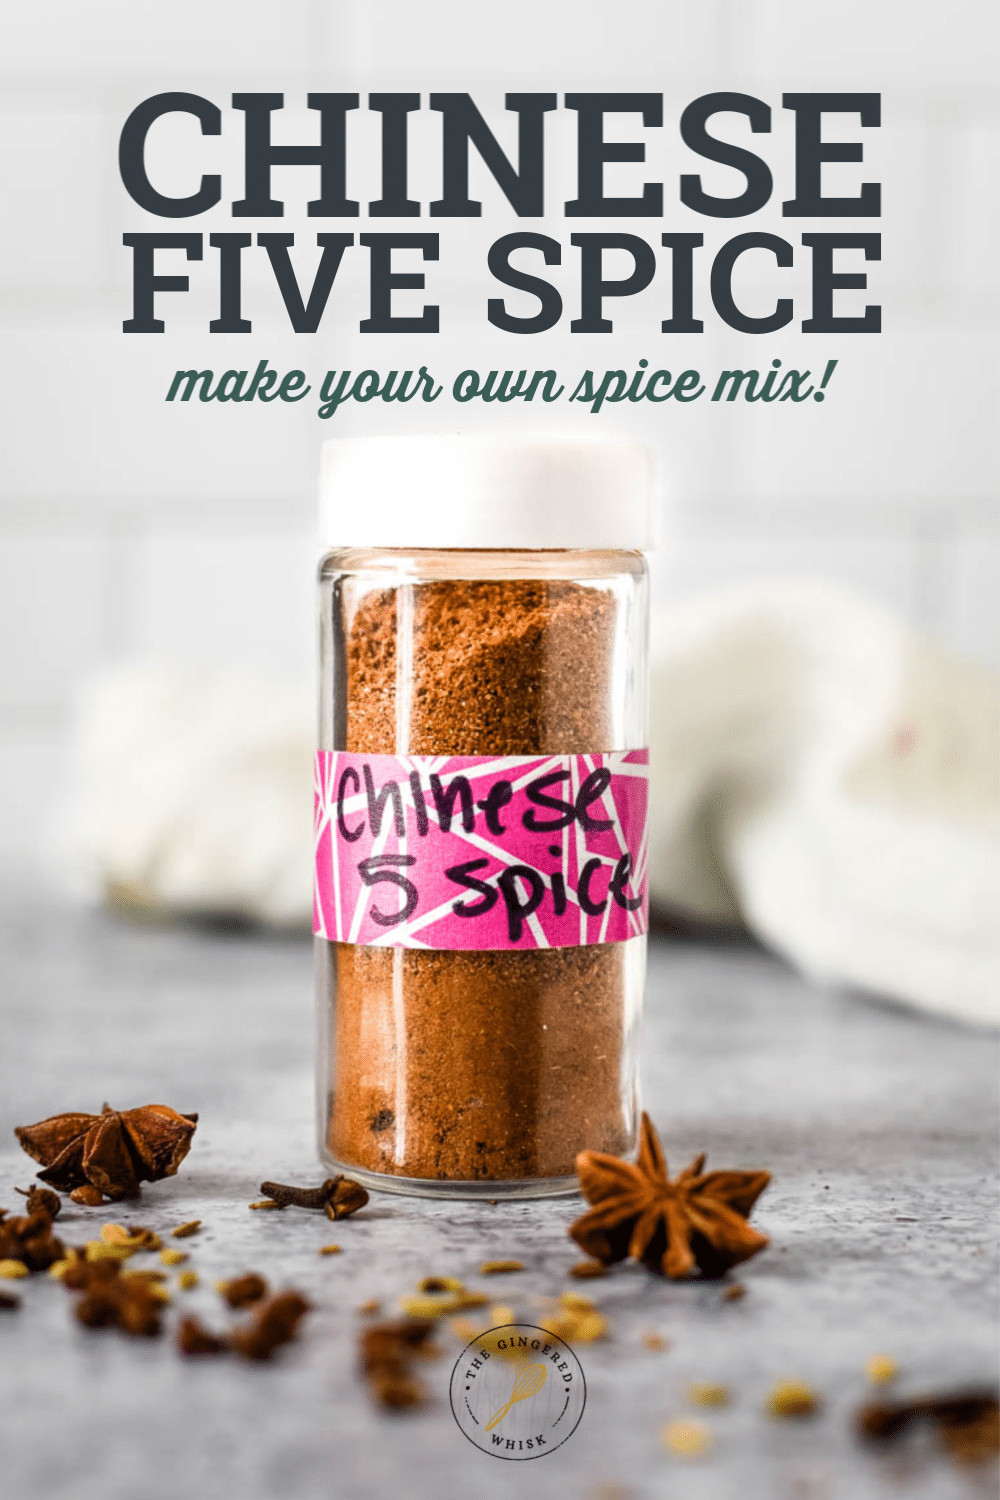 Recipes Using Chinese Five Spice
 Chinese Five Spice Powder Recipe